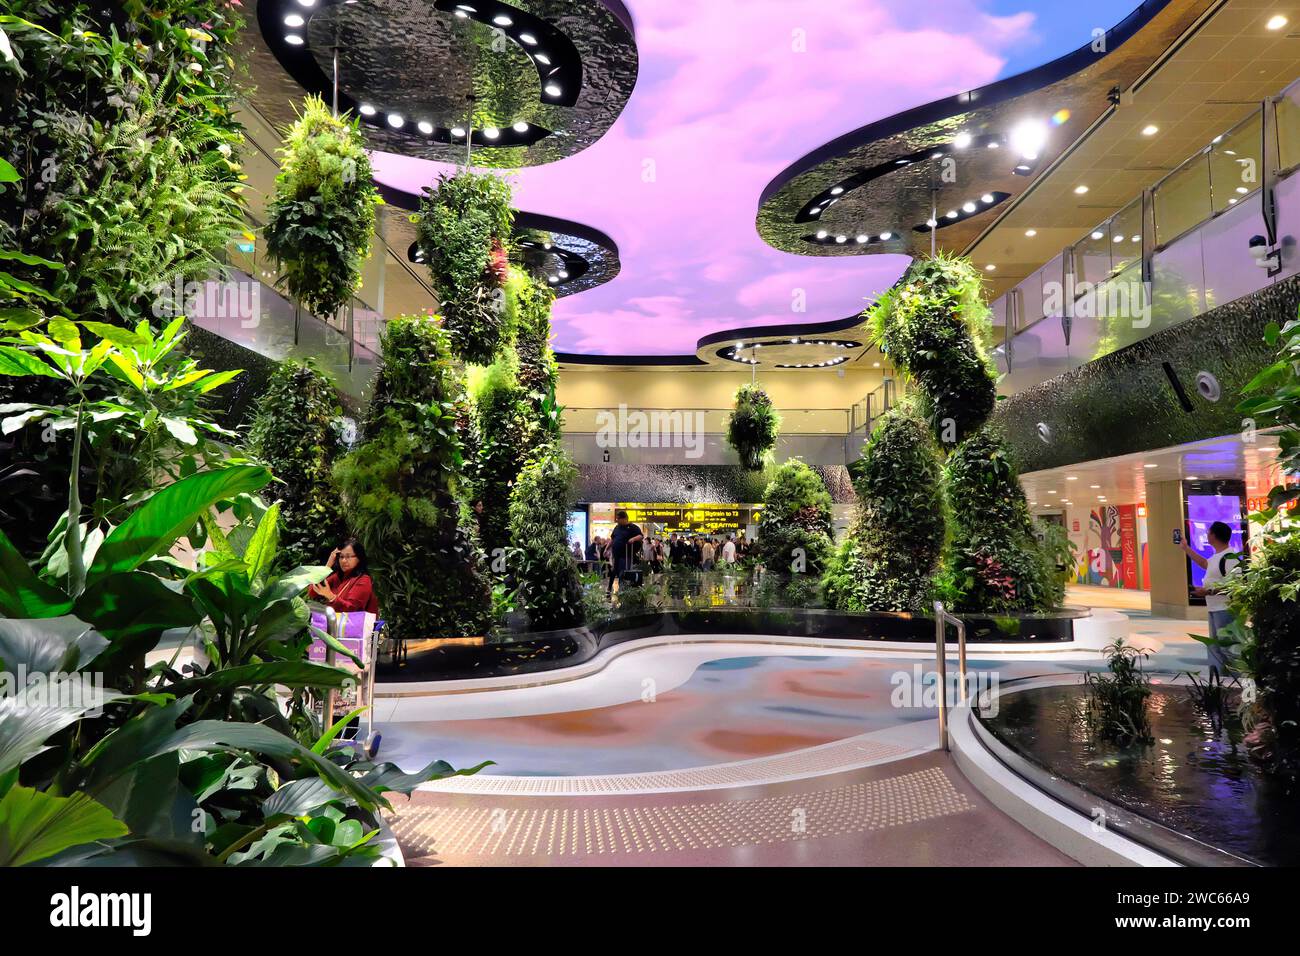 Interior view of Terminal 2, dreamscape with immersive garden and digital sky, Changi Airport Singapore, Singapore Stock Photo